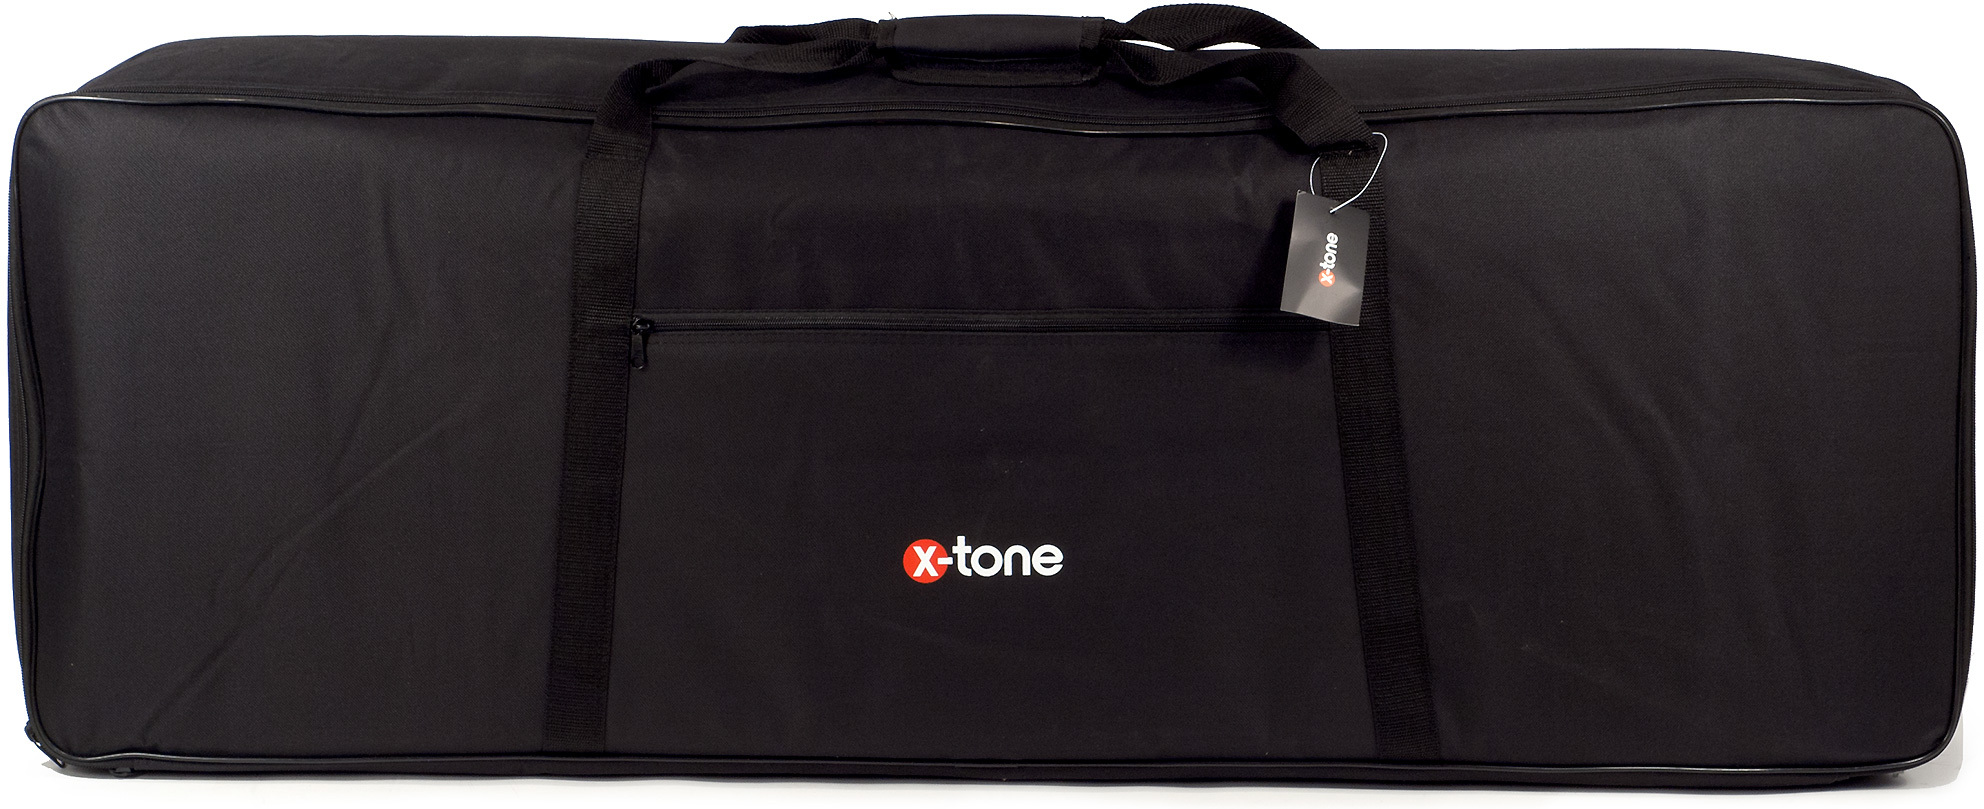 X-tone 2100 Pour Clavier 61 Notes En 10 Mm Black - Gigbag for Keyboard - Main picture